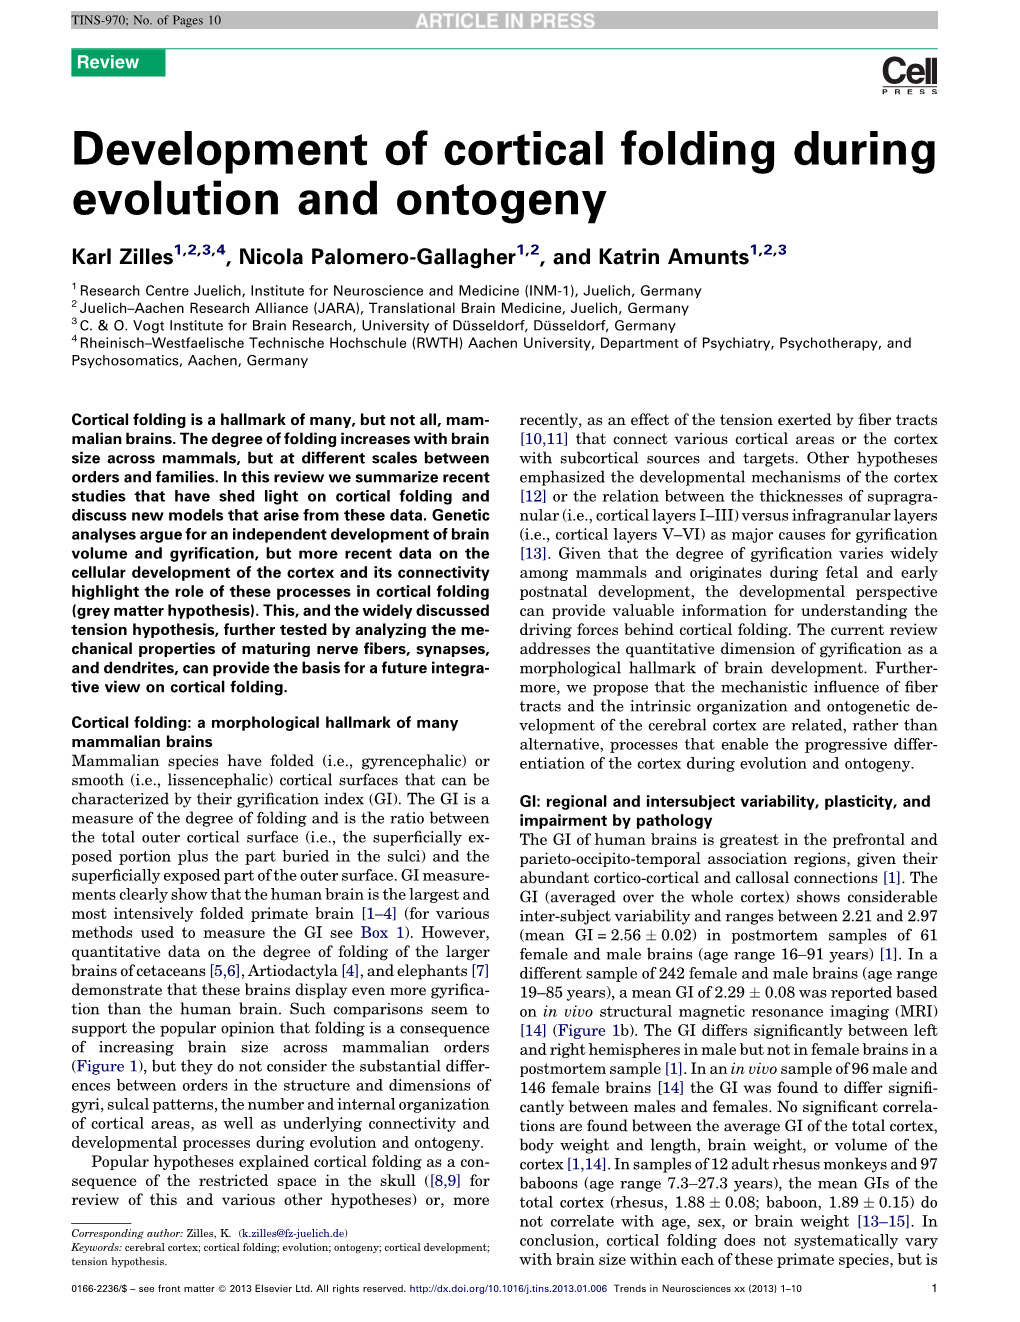 Development of Cortical Folding During Evolution and Ontogeny